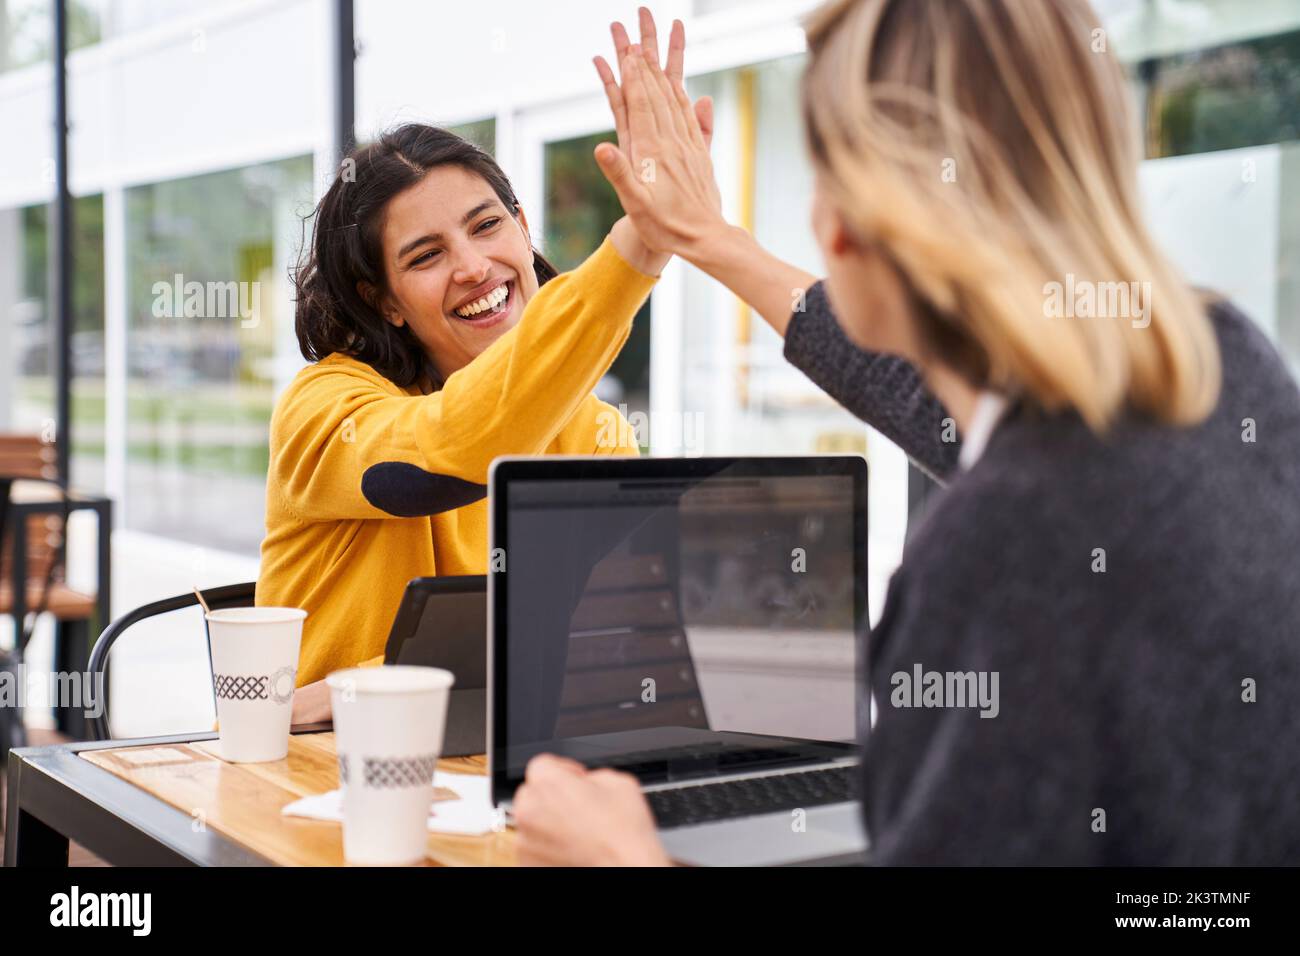 Shot of two female work mates high-fiving each other while working outdoors Stock Photo